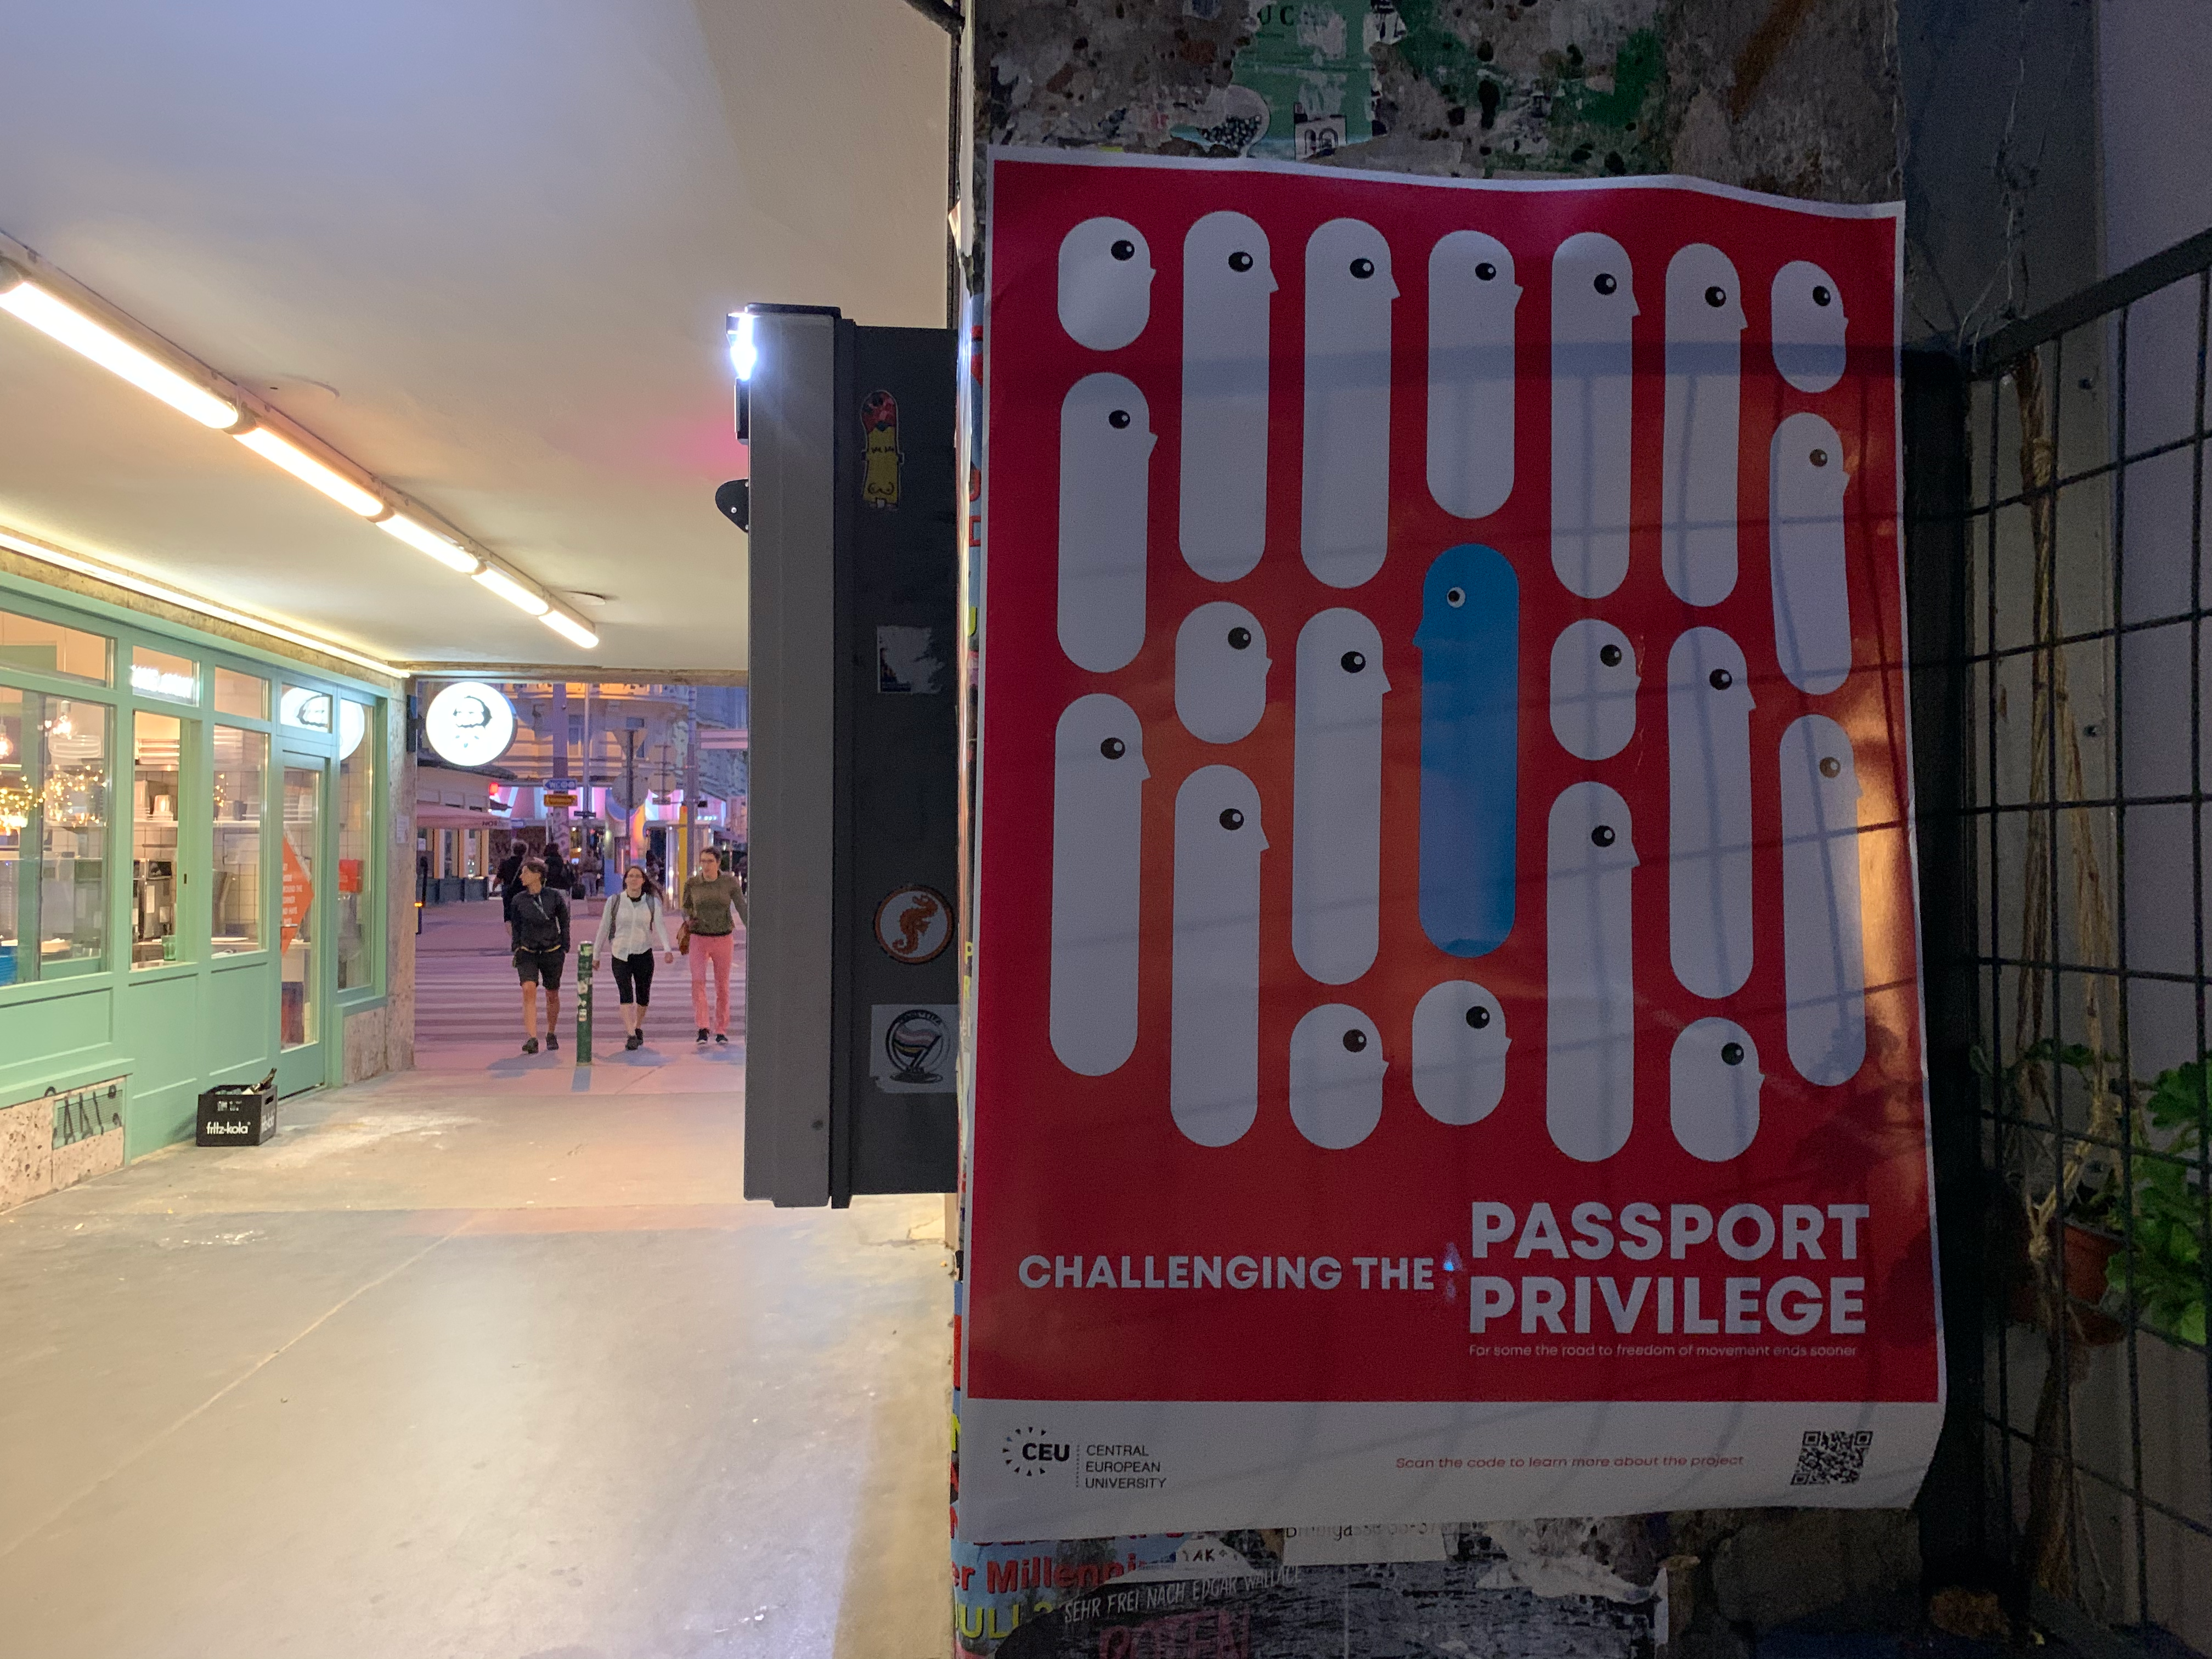 Red “challenging the Passport Privilege” poster hung in a public walkway